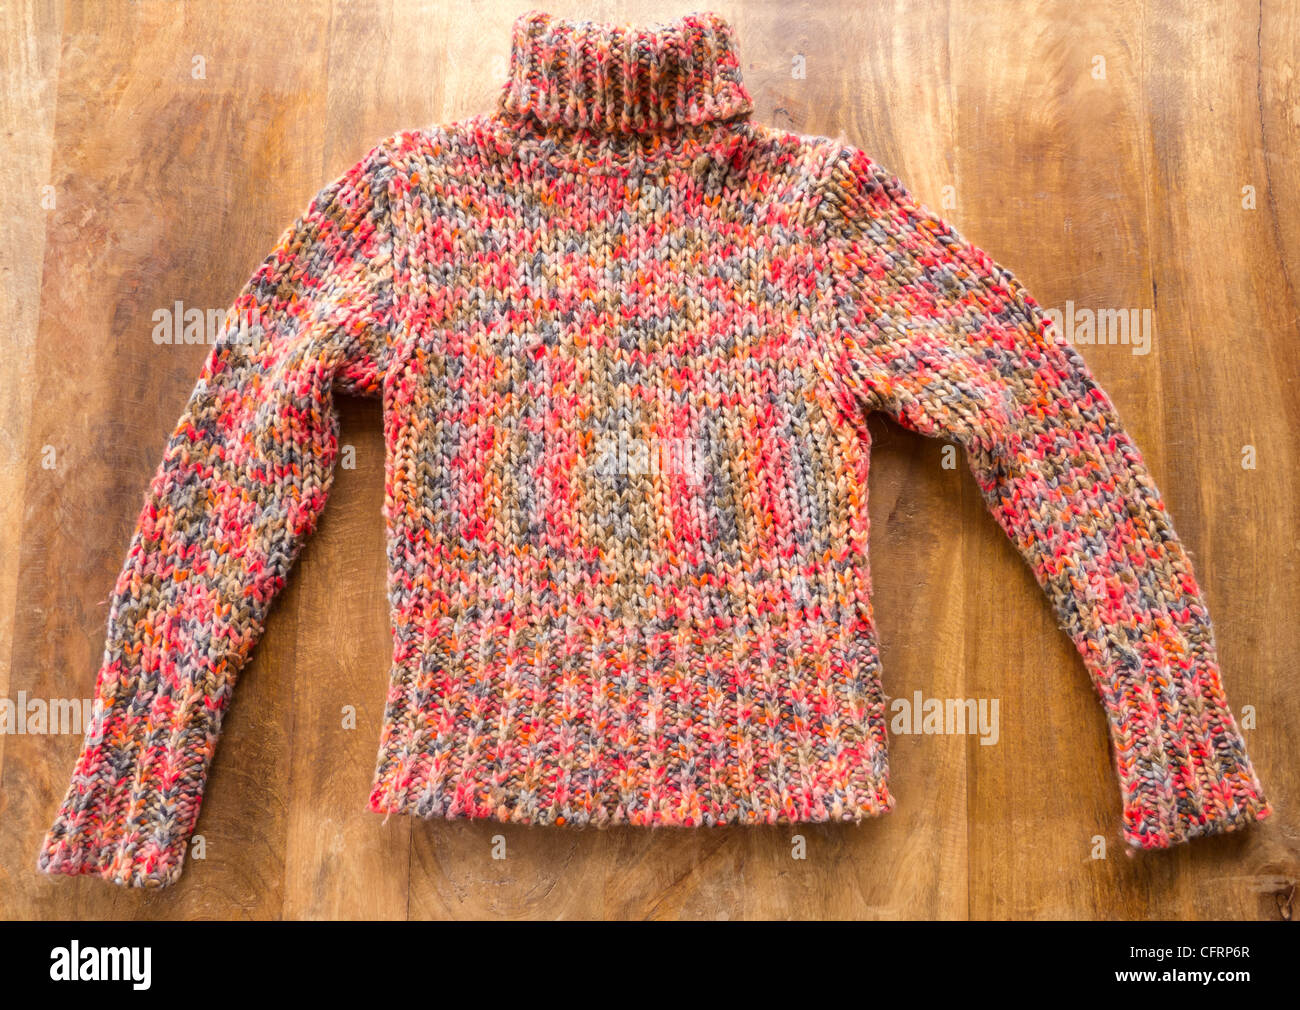 Knitted Sweater Stock Photo